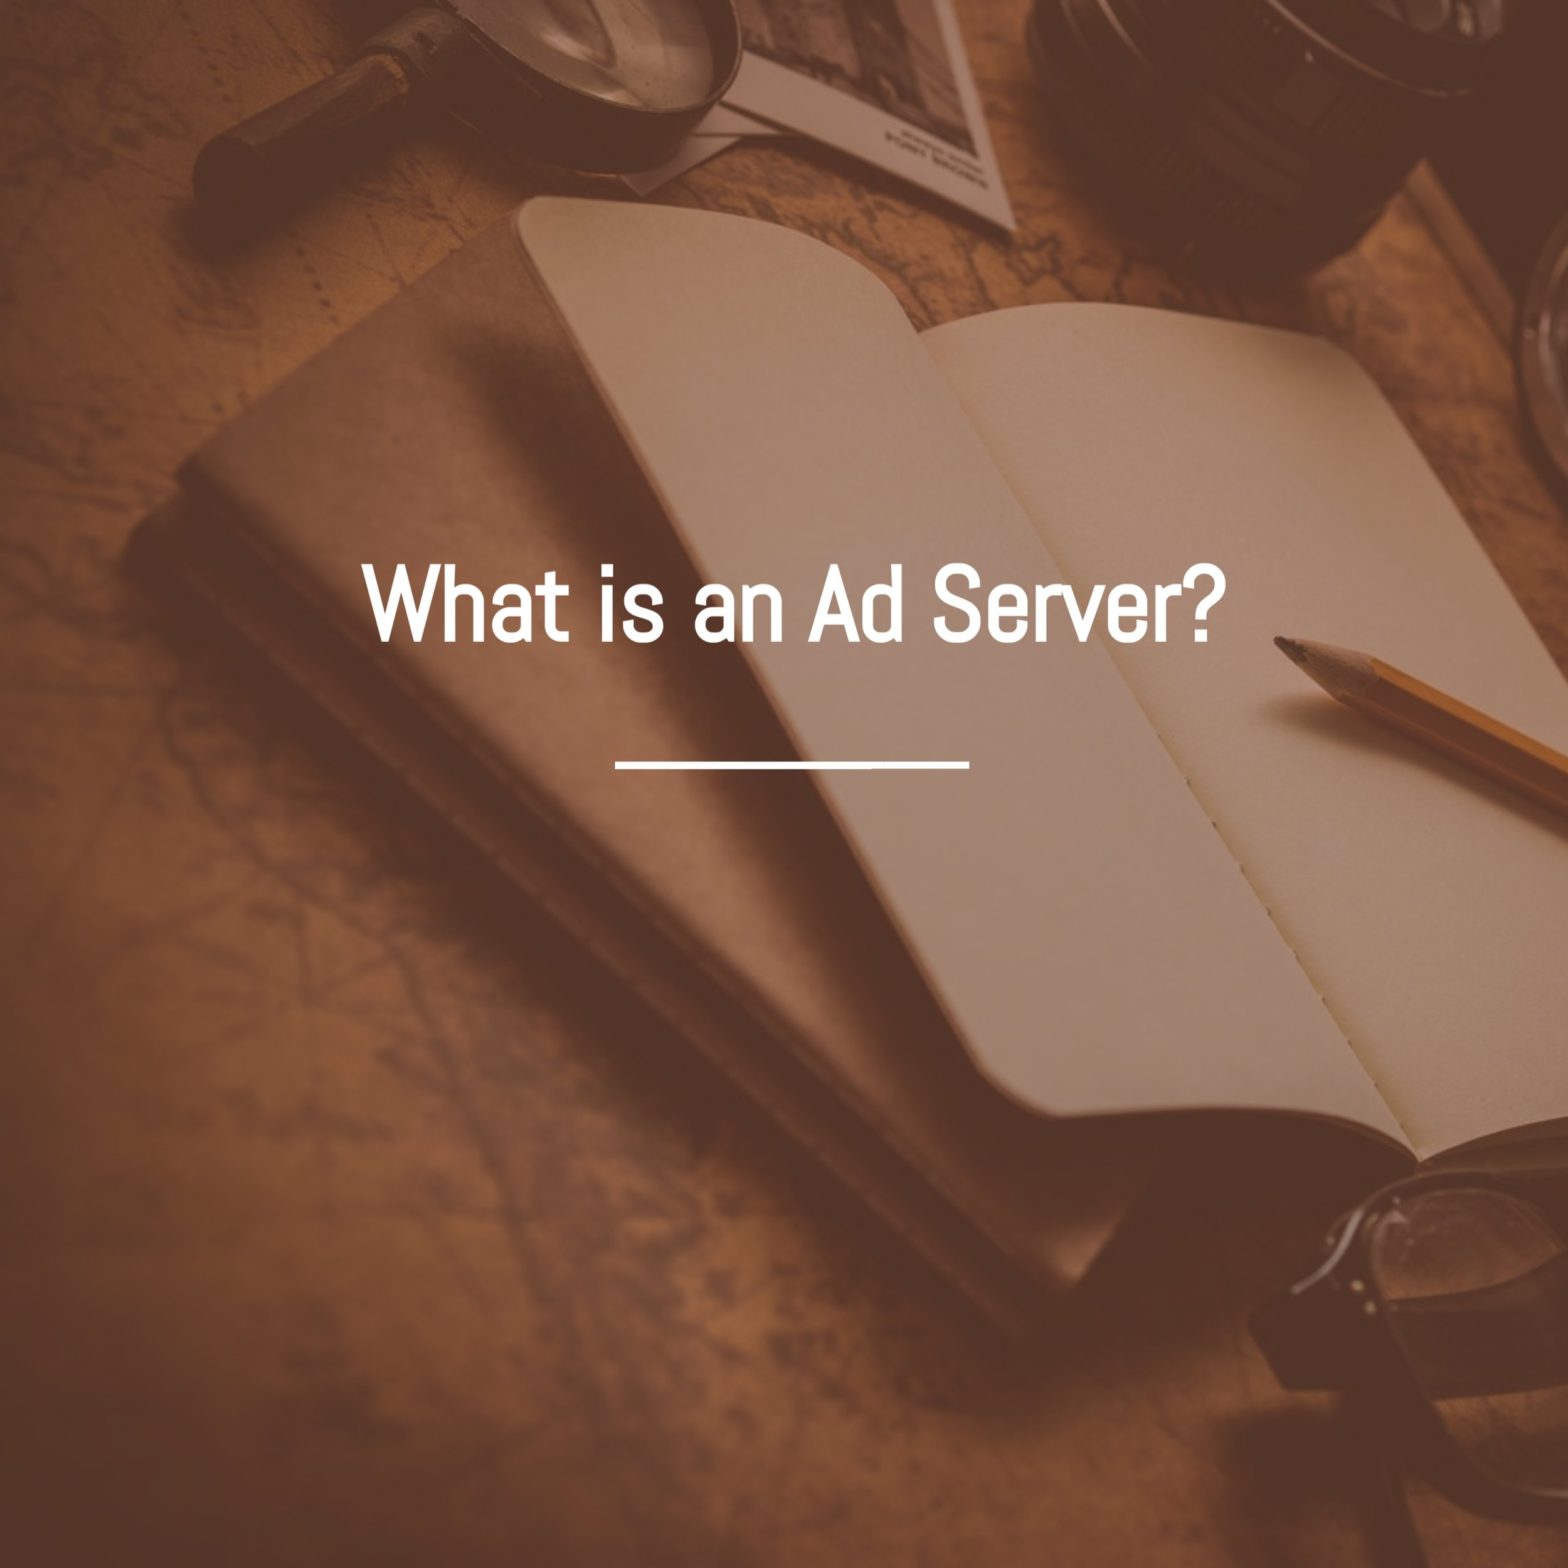 What is an Ad Server?